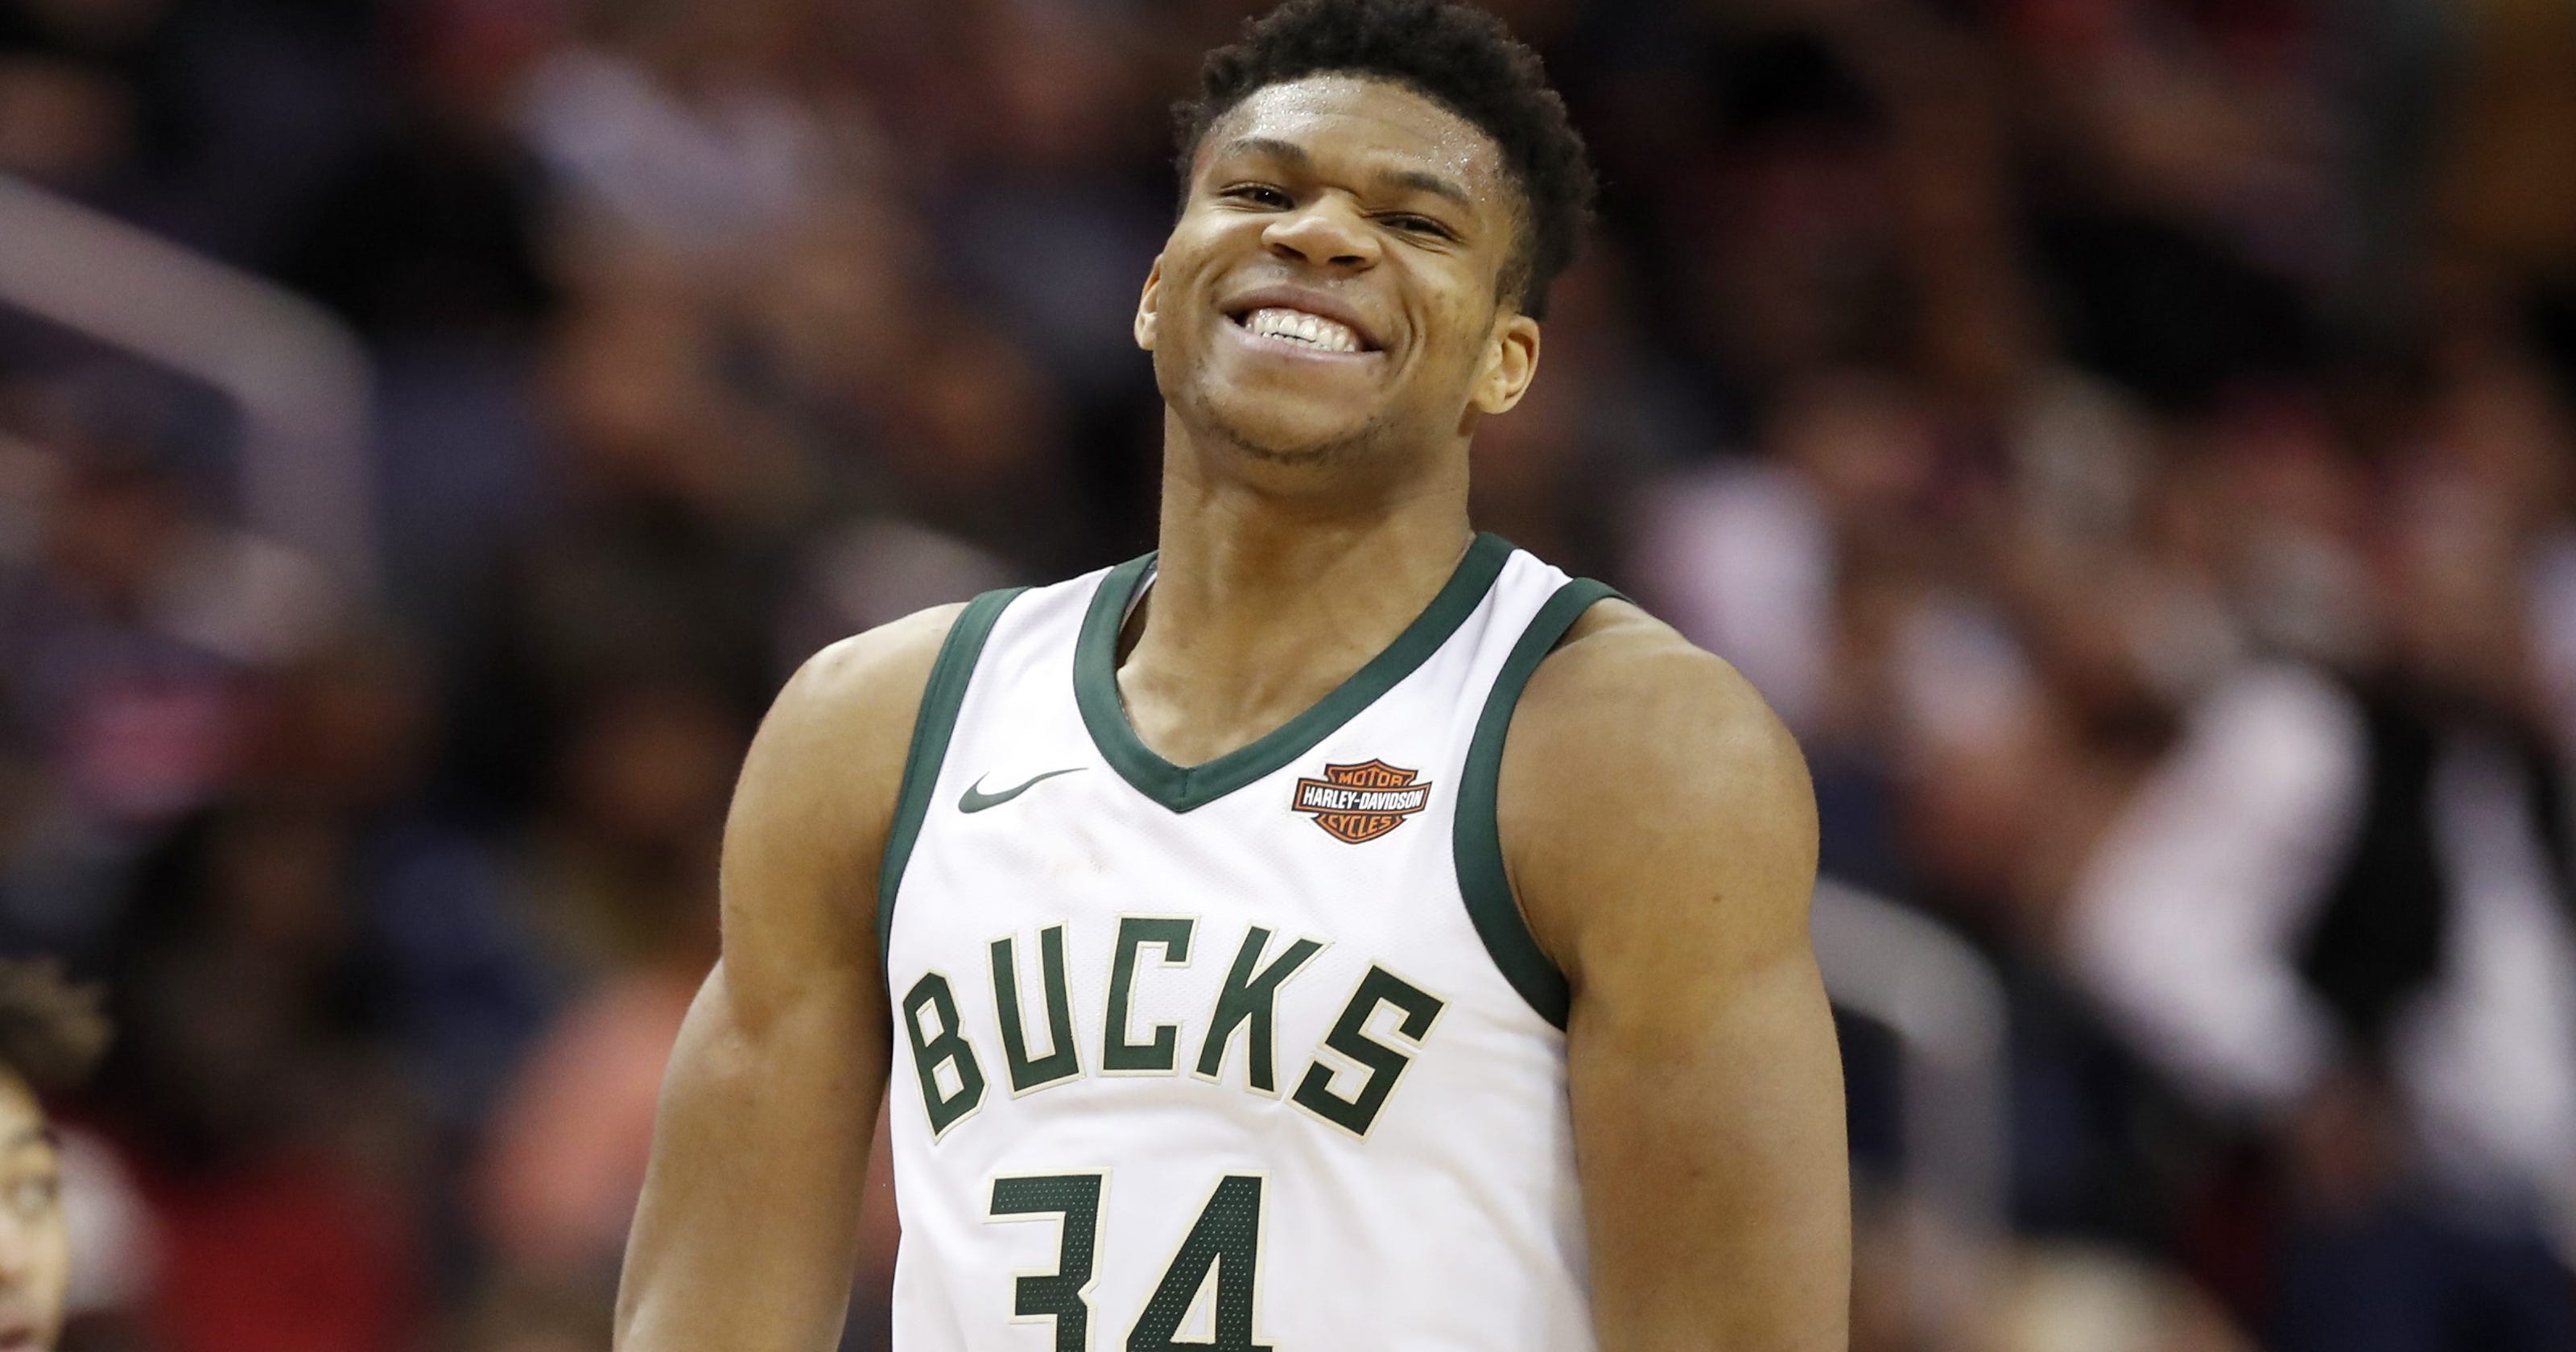 20 foods Giannis Antetokounmpo should try3200 x 1680